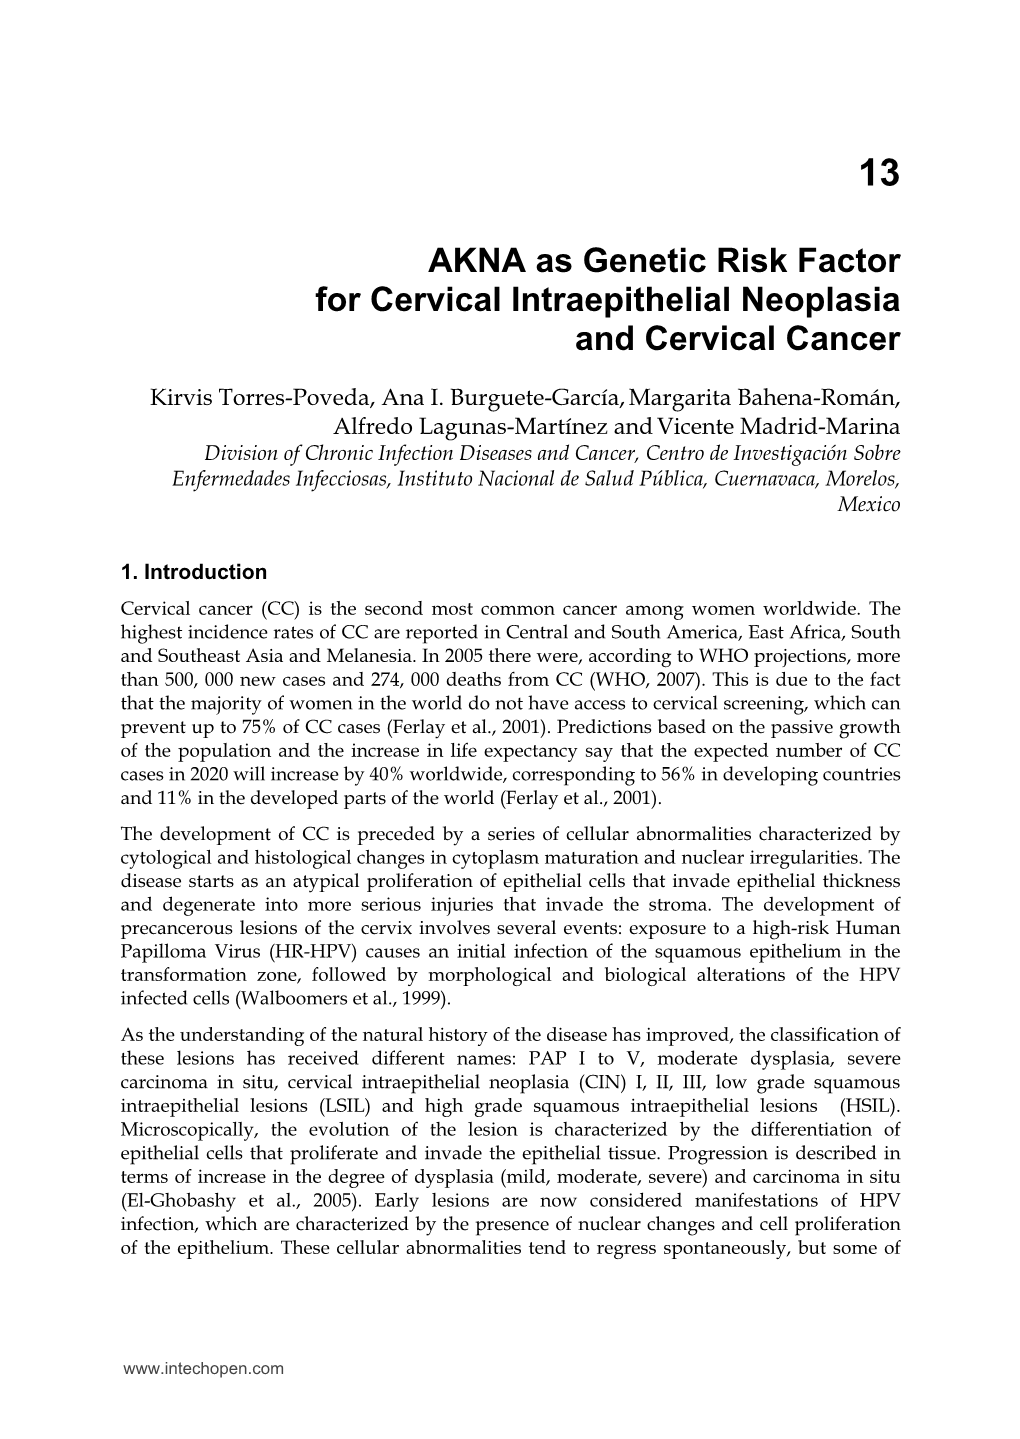 AKNA As Genetic Risk Factor for Cervical Intraepithelial Neoplasia and Cervical Cancer